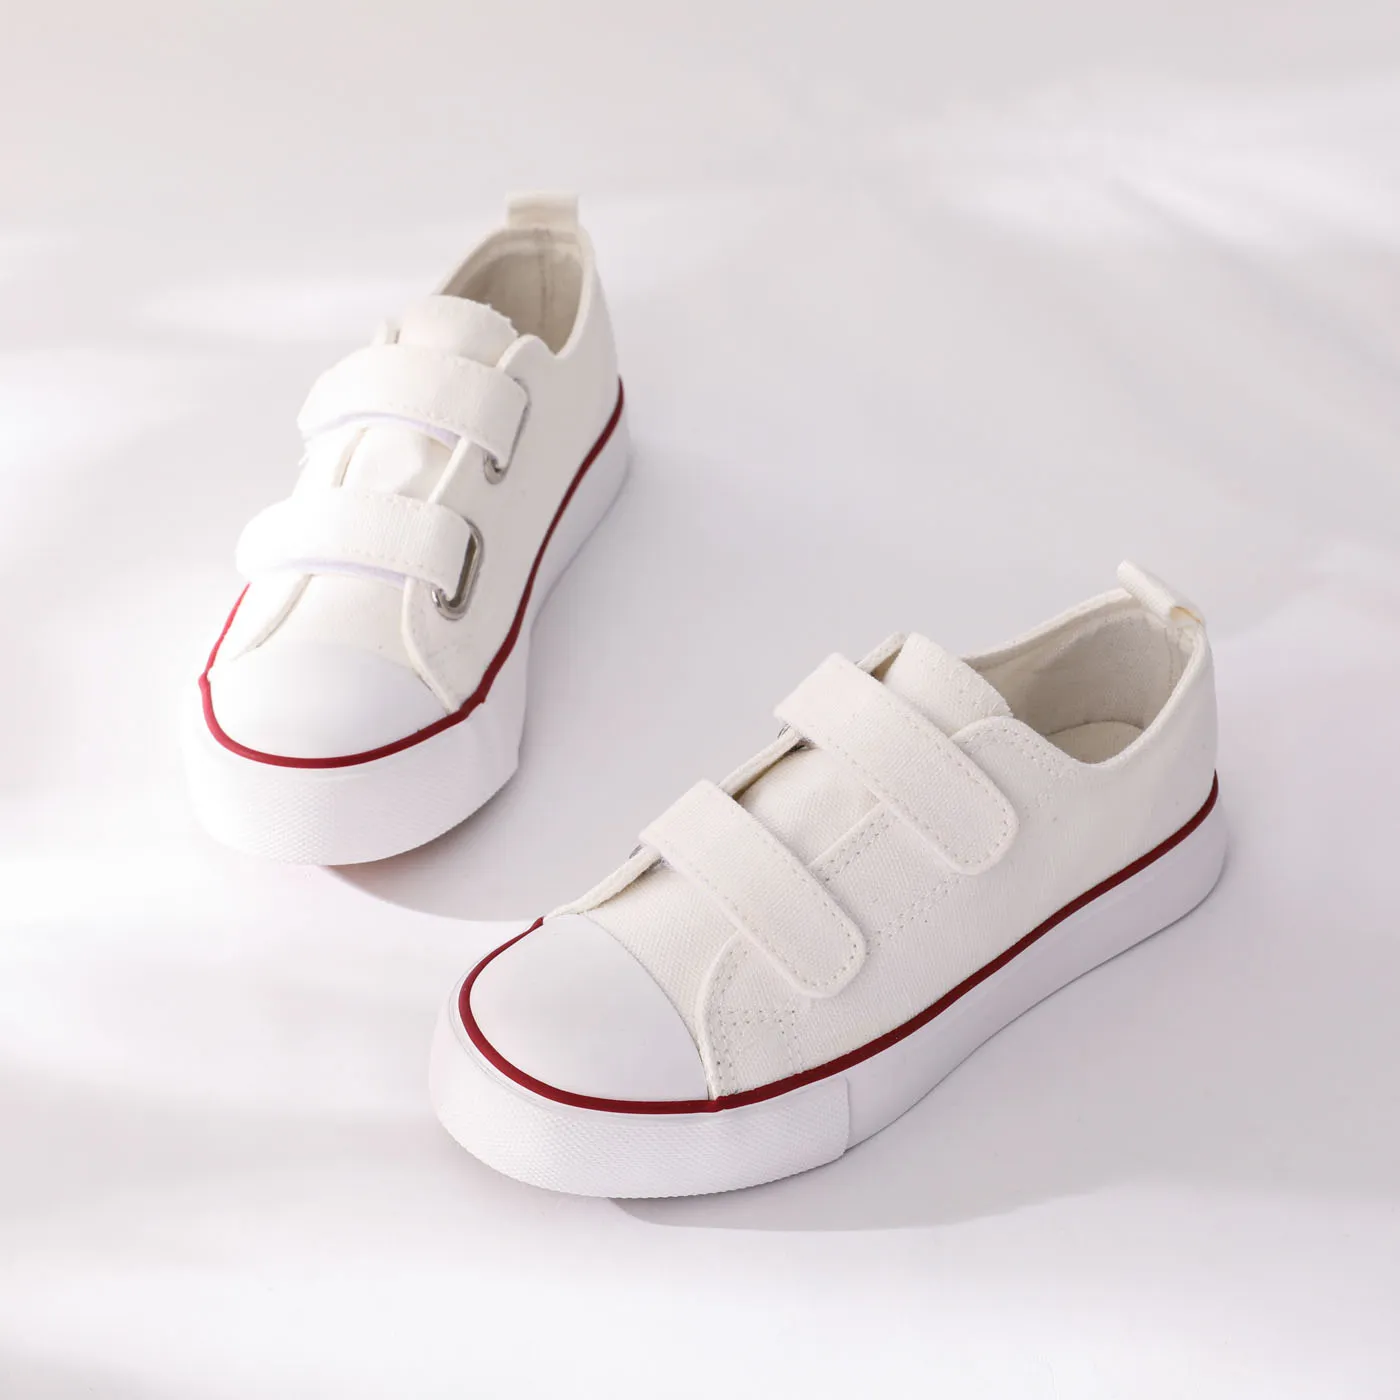 Toddler/Kid Basic Velcro Casual Shoes